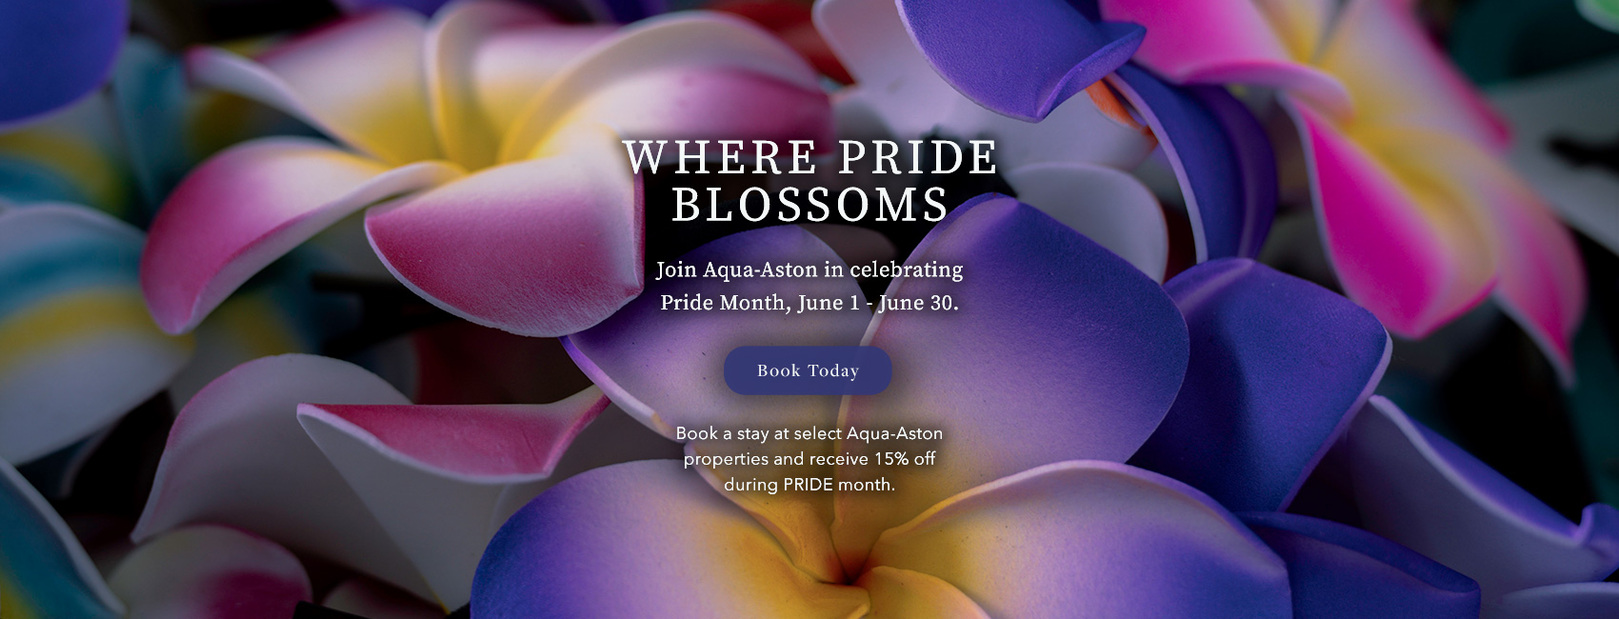 Where Pride Blossoms. Join Aqua-Aston in celebrating Pride Month, June 1 through June 30. Book Today. Book a stay at select Aqua-Aston properties and receive 15% off during PRIDE month.